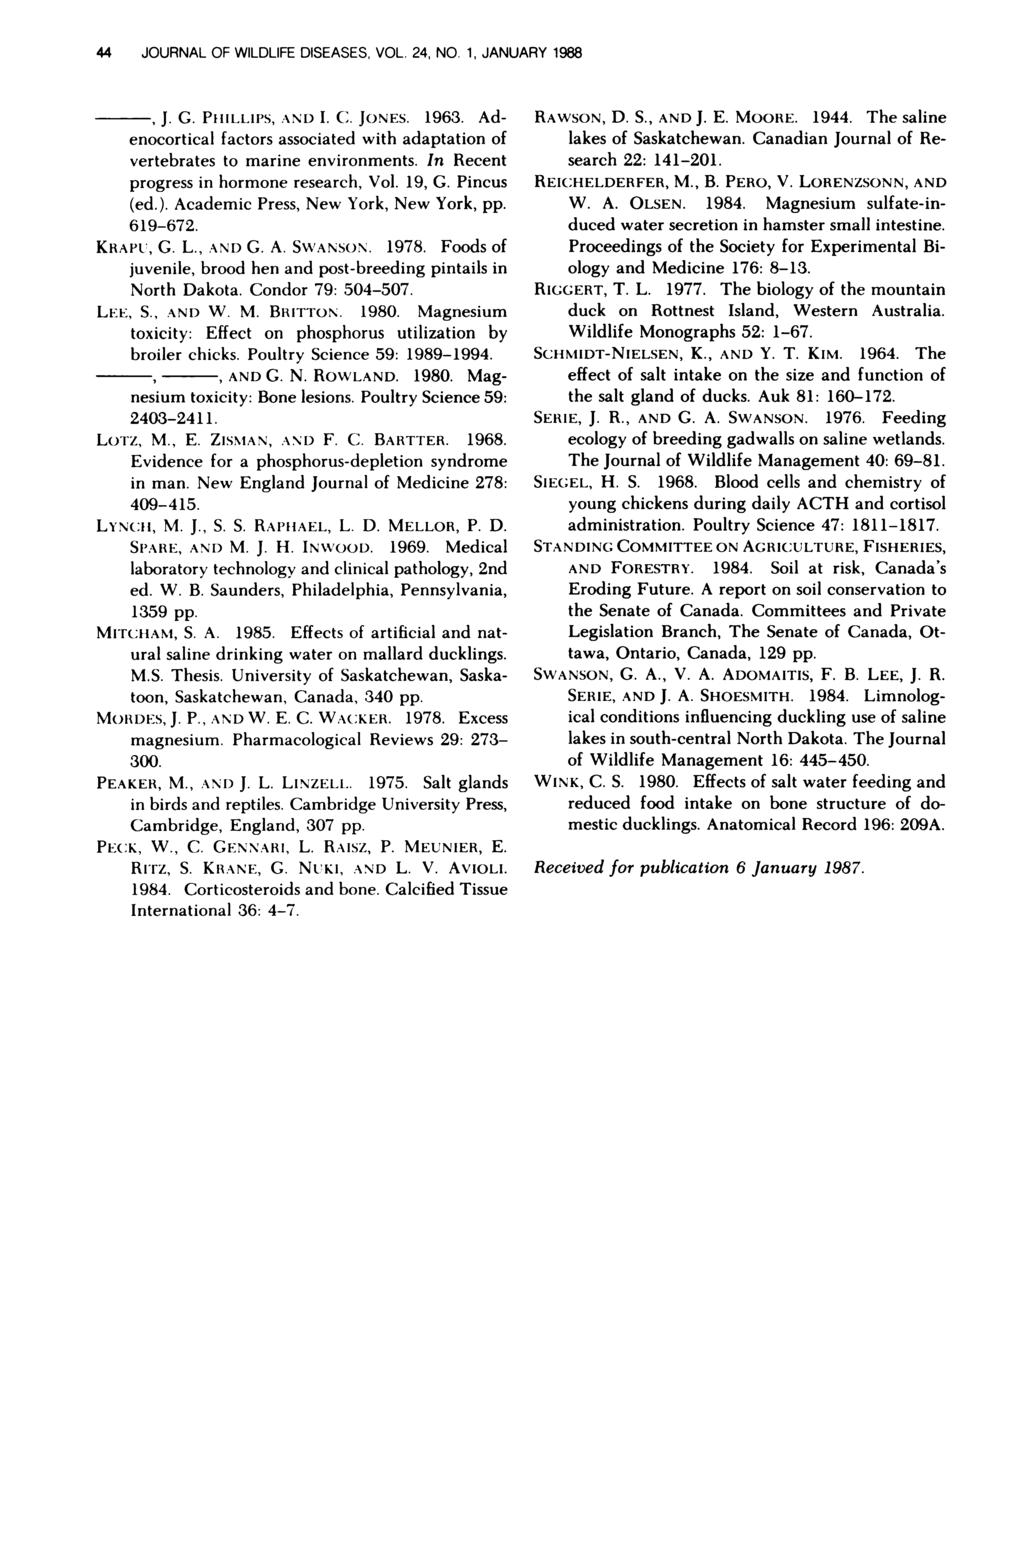 44 JOURNAL OF WILDLIFE DISEASES, VOL. 24, NO. 1, JANUARY 1988 J. G. PIIILI.IPS, AND I.. JONES. 1963. Adenocorticl fctors ssocited with dpttion of vertebrtes to mrine environments.